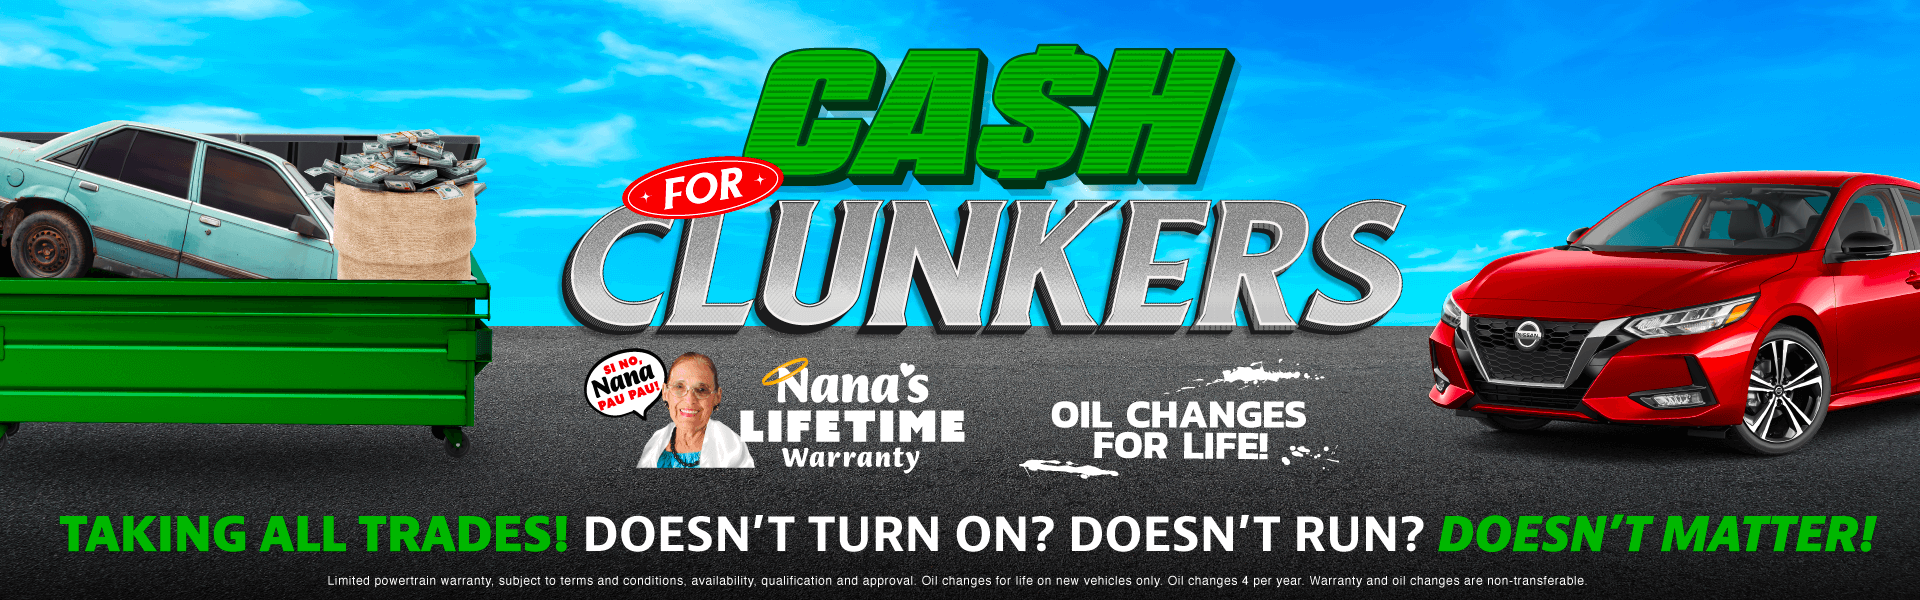 Cash for Clunkers I We'll Pay Cash for Your Old Car I Get Cash Now